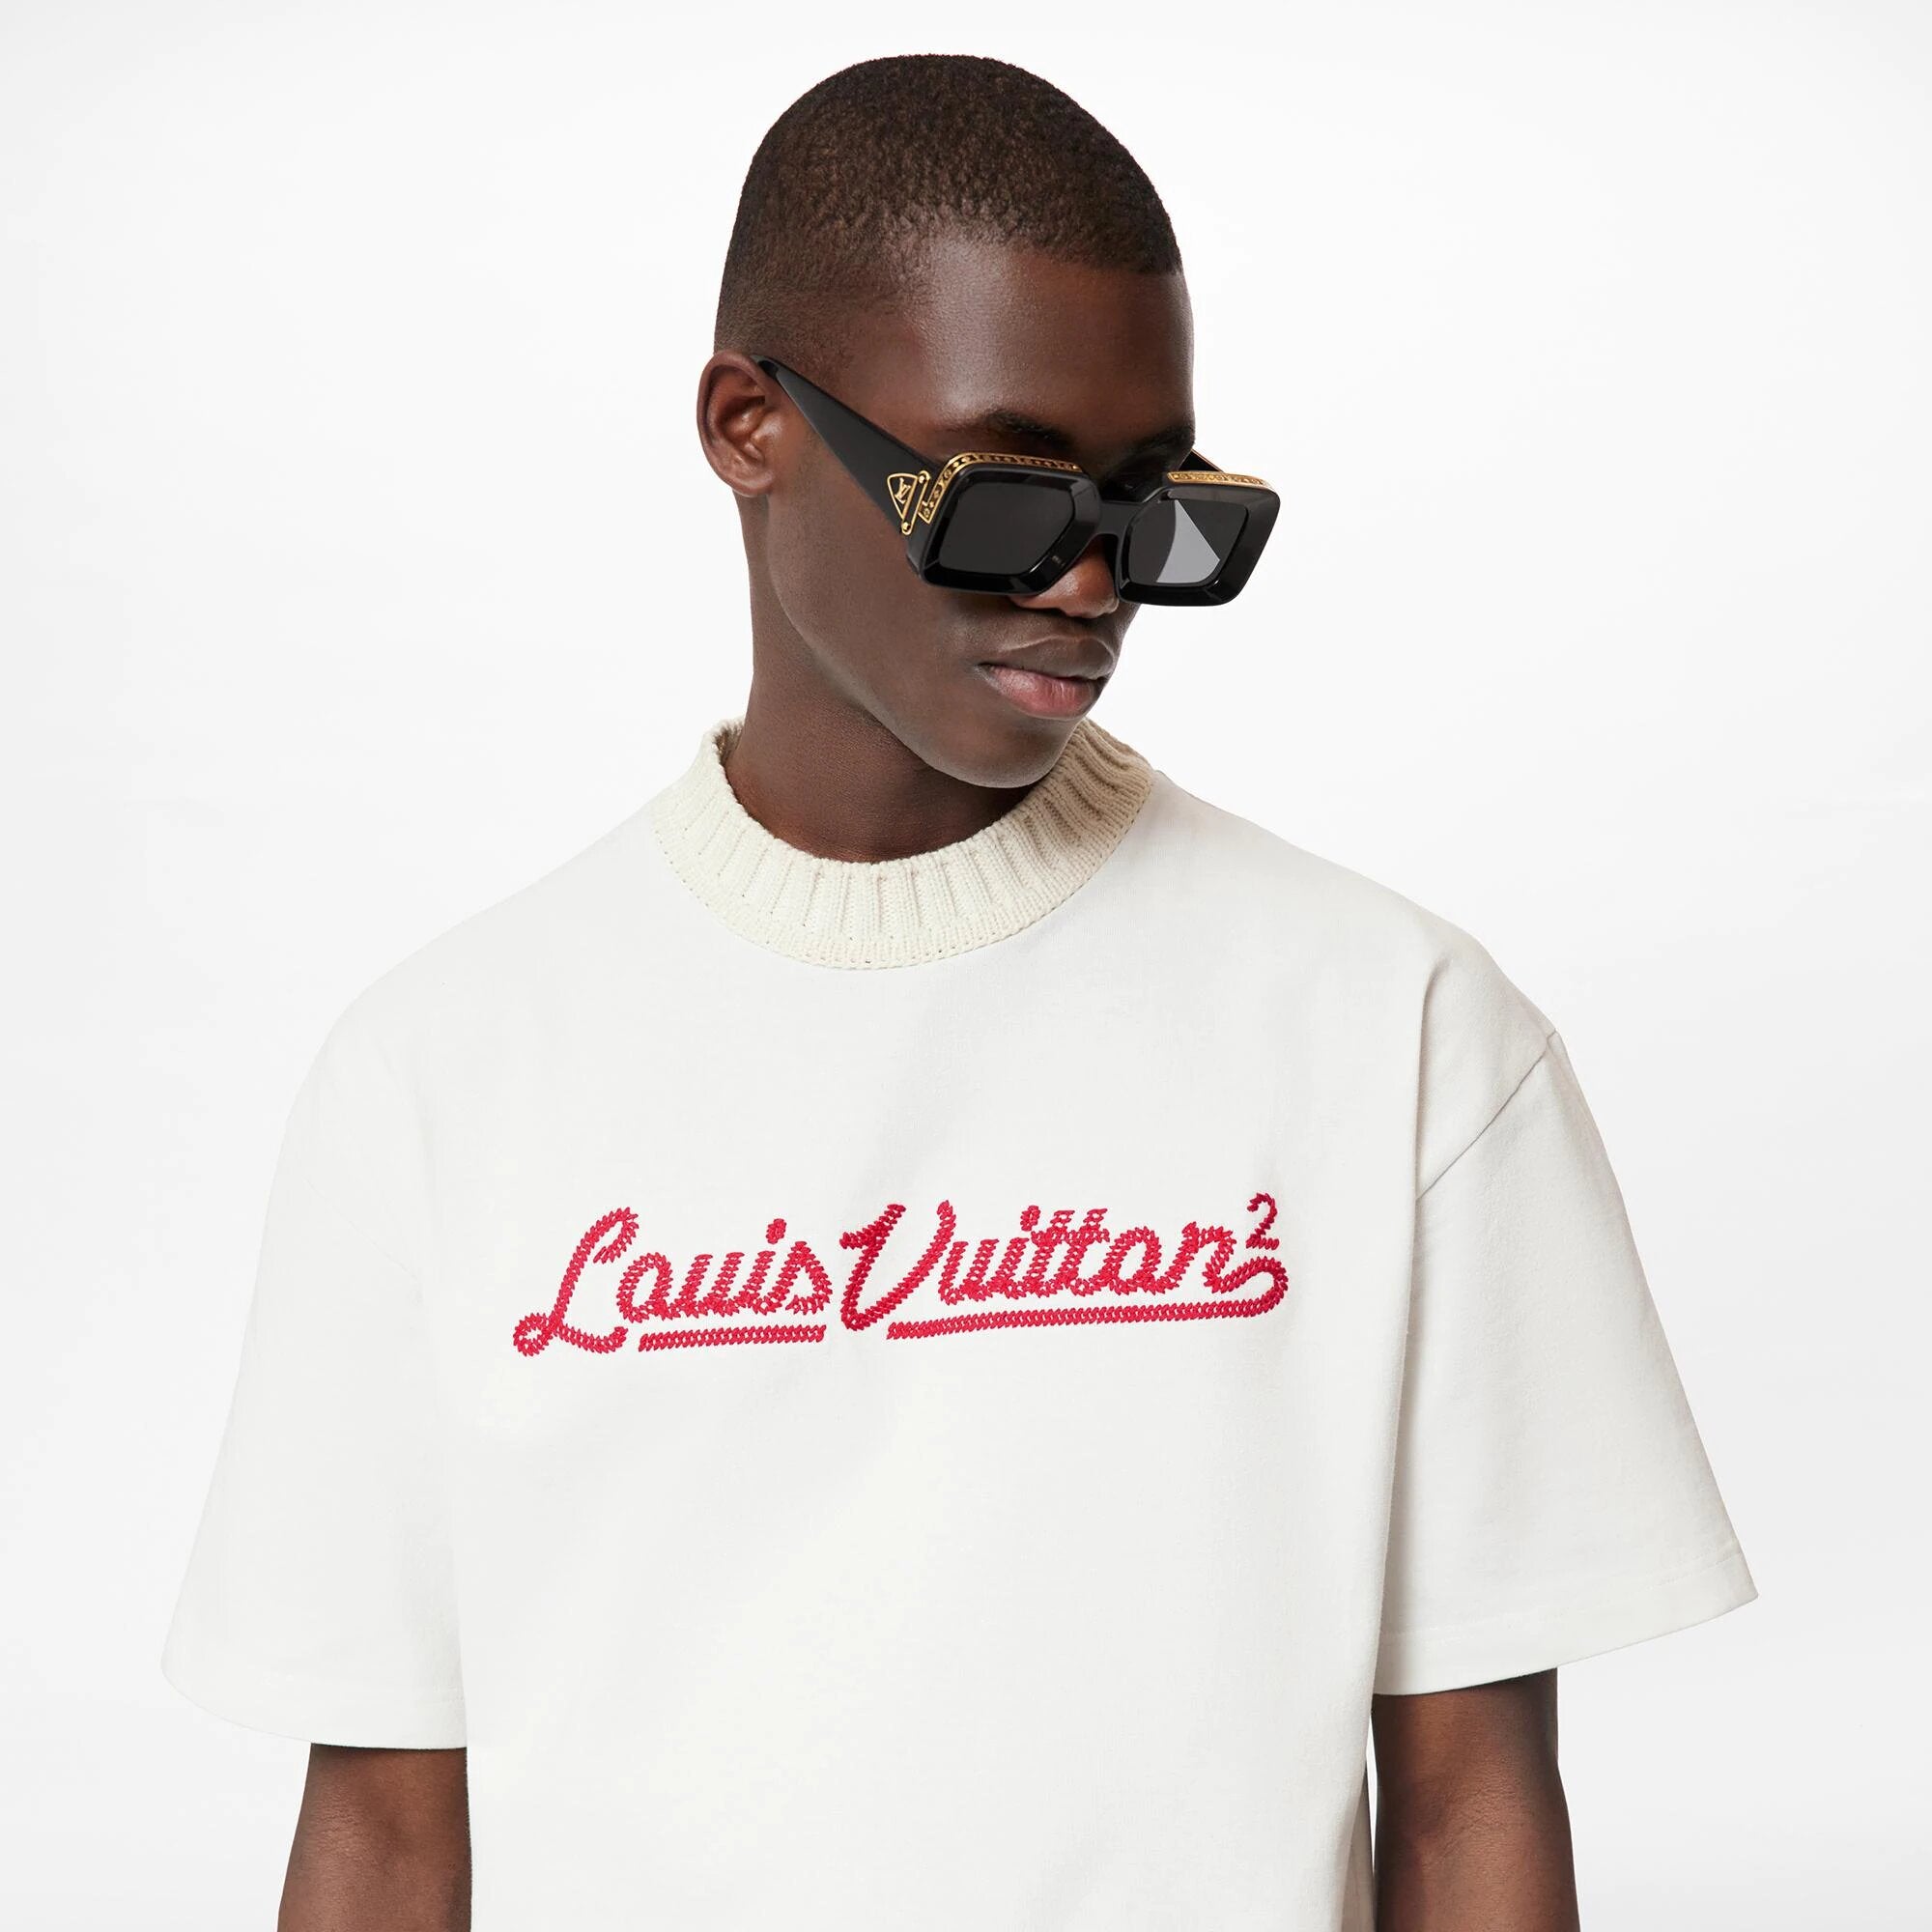 LOUIS VUITTON EMBROIDERED MOCKNECK WHITE T-SHIRT